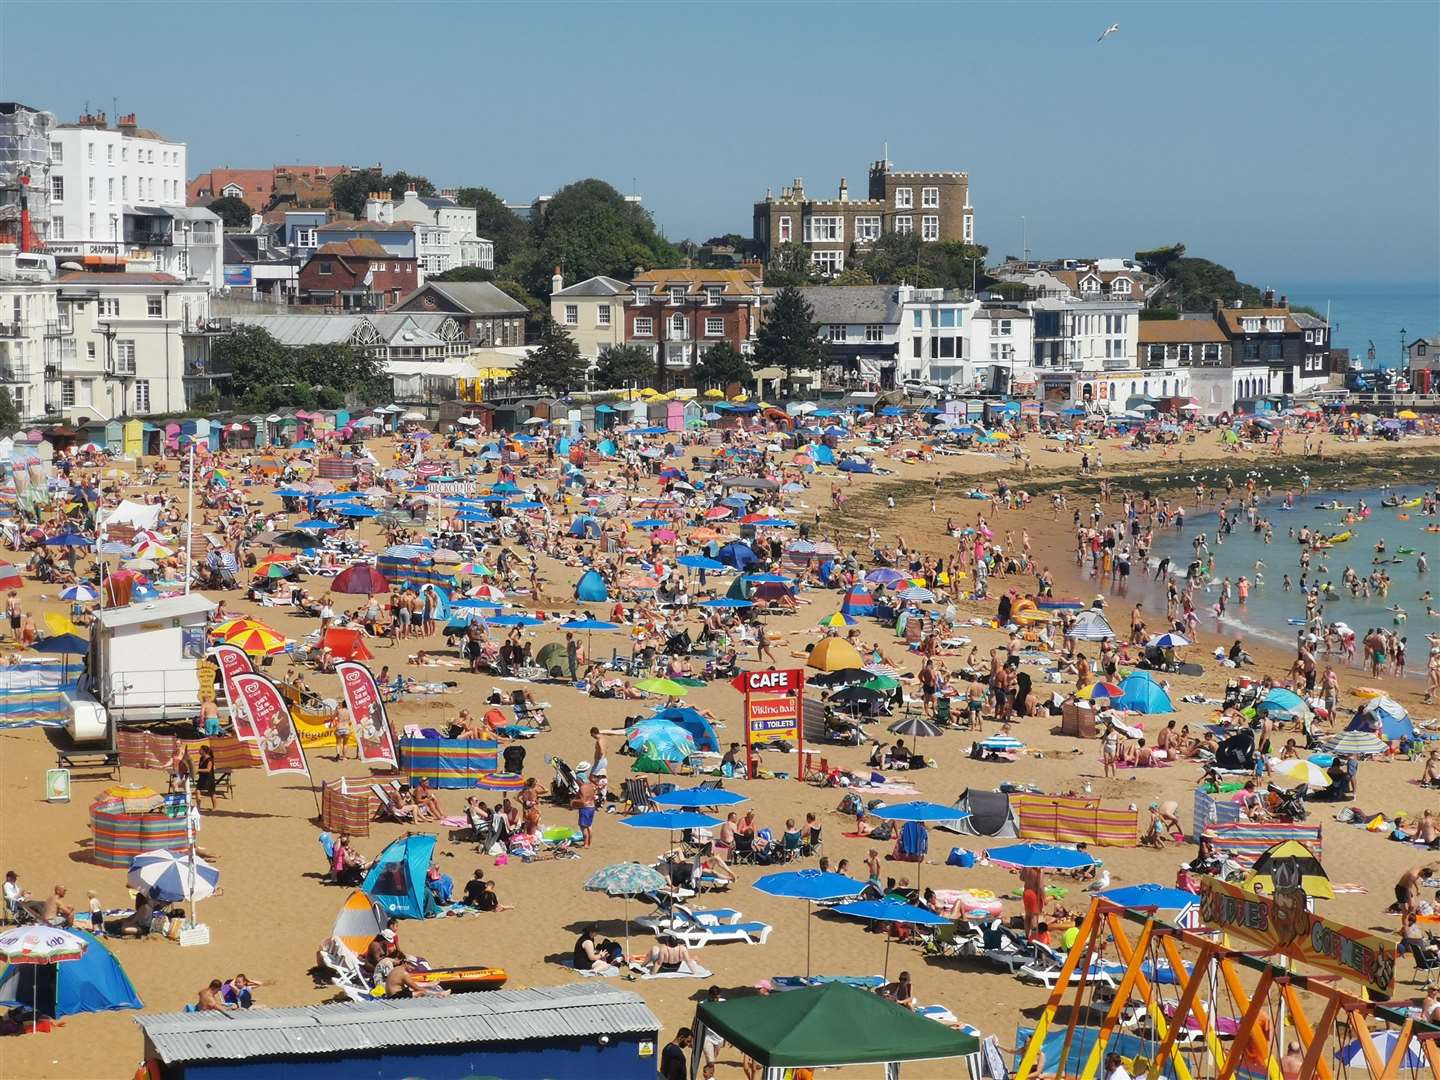 Crowds packed onto Thanet beaches in the heatwave last week - and it could be a similar scene today